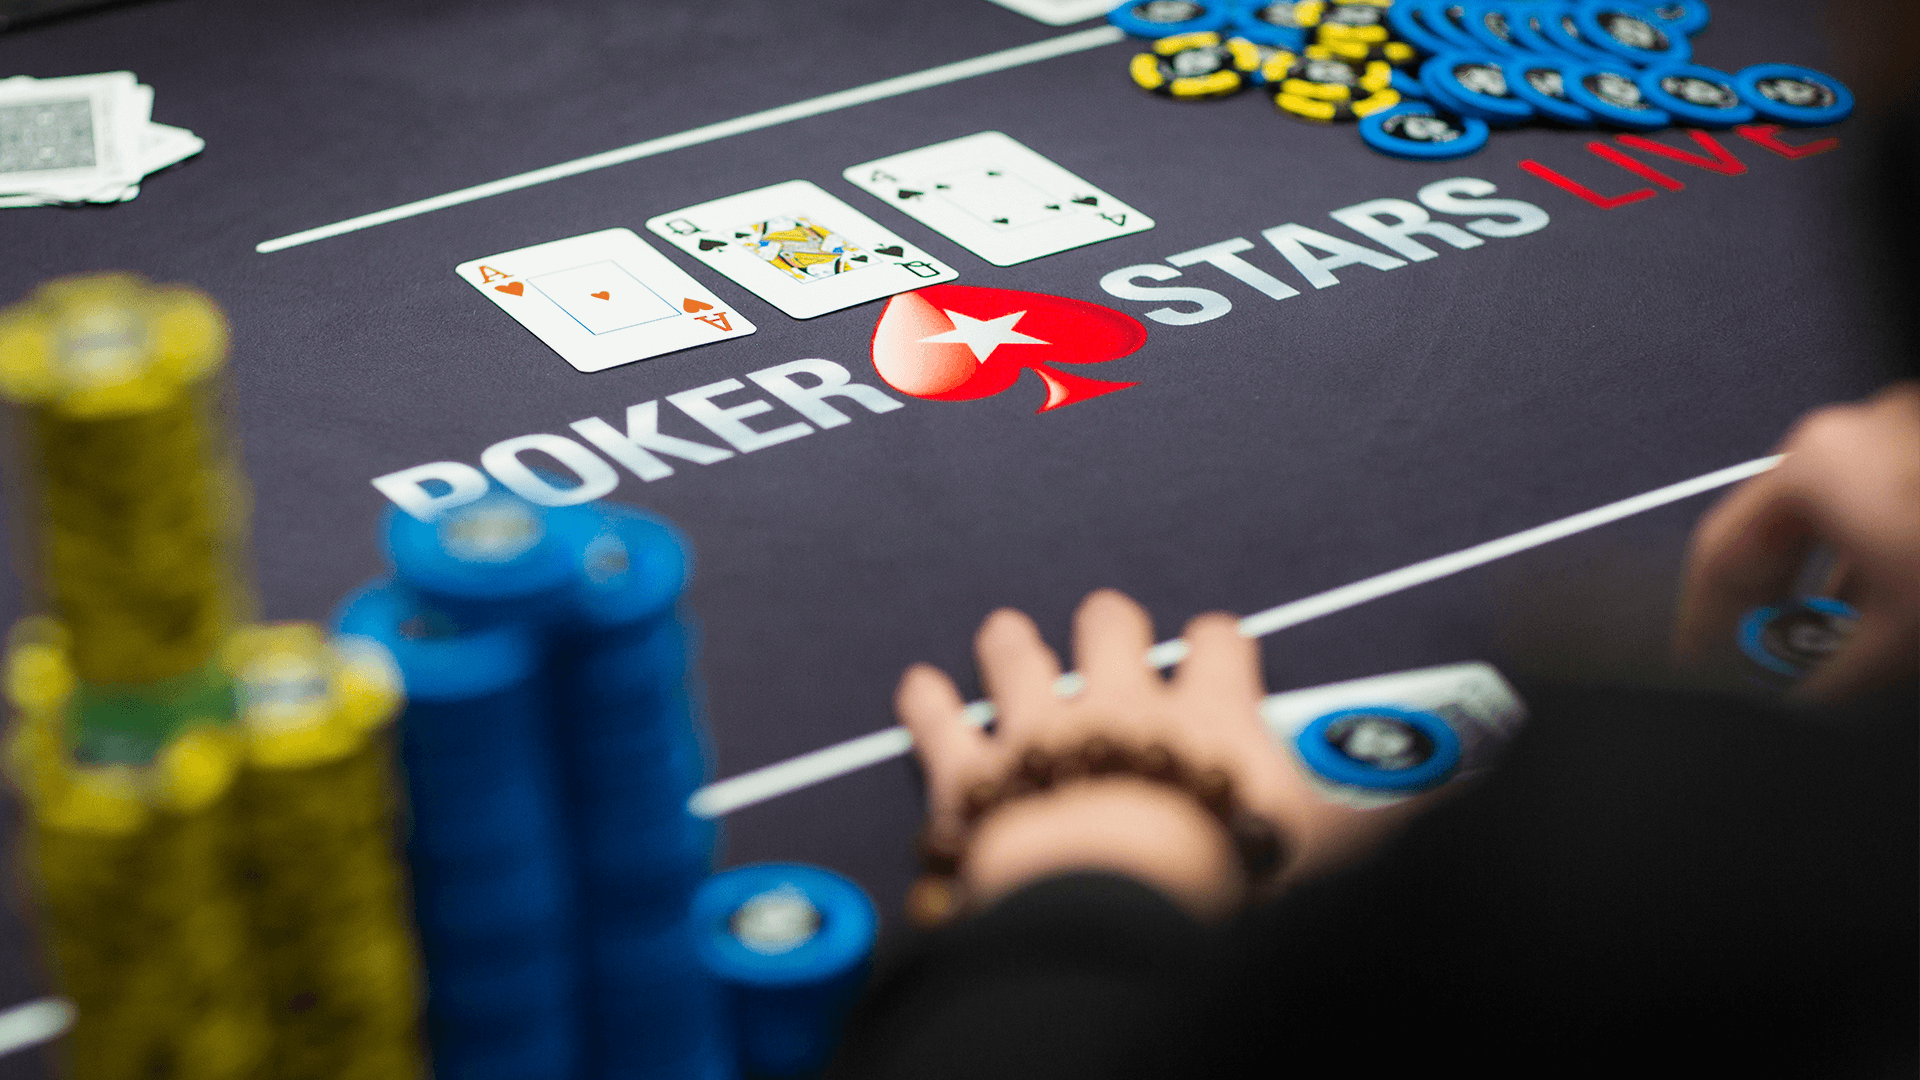 What is poker datamining, and also where to get it, how to use it and avoid the ban (p.1)?